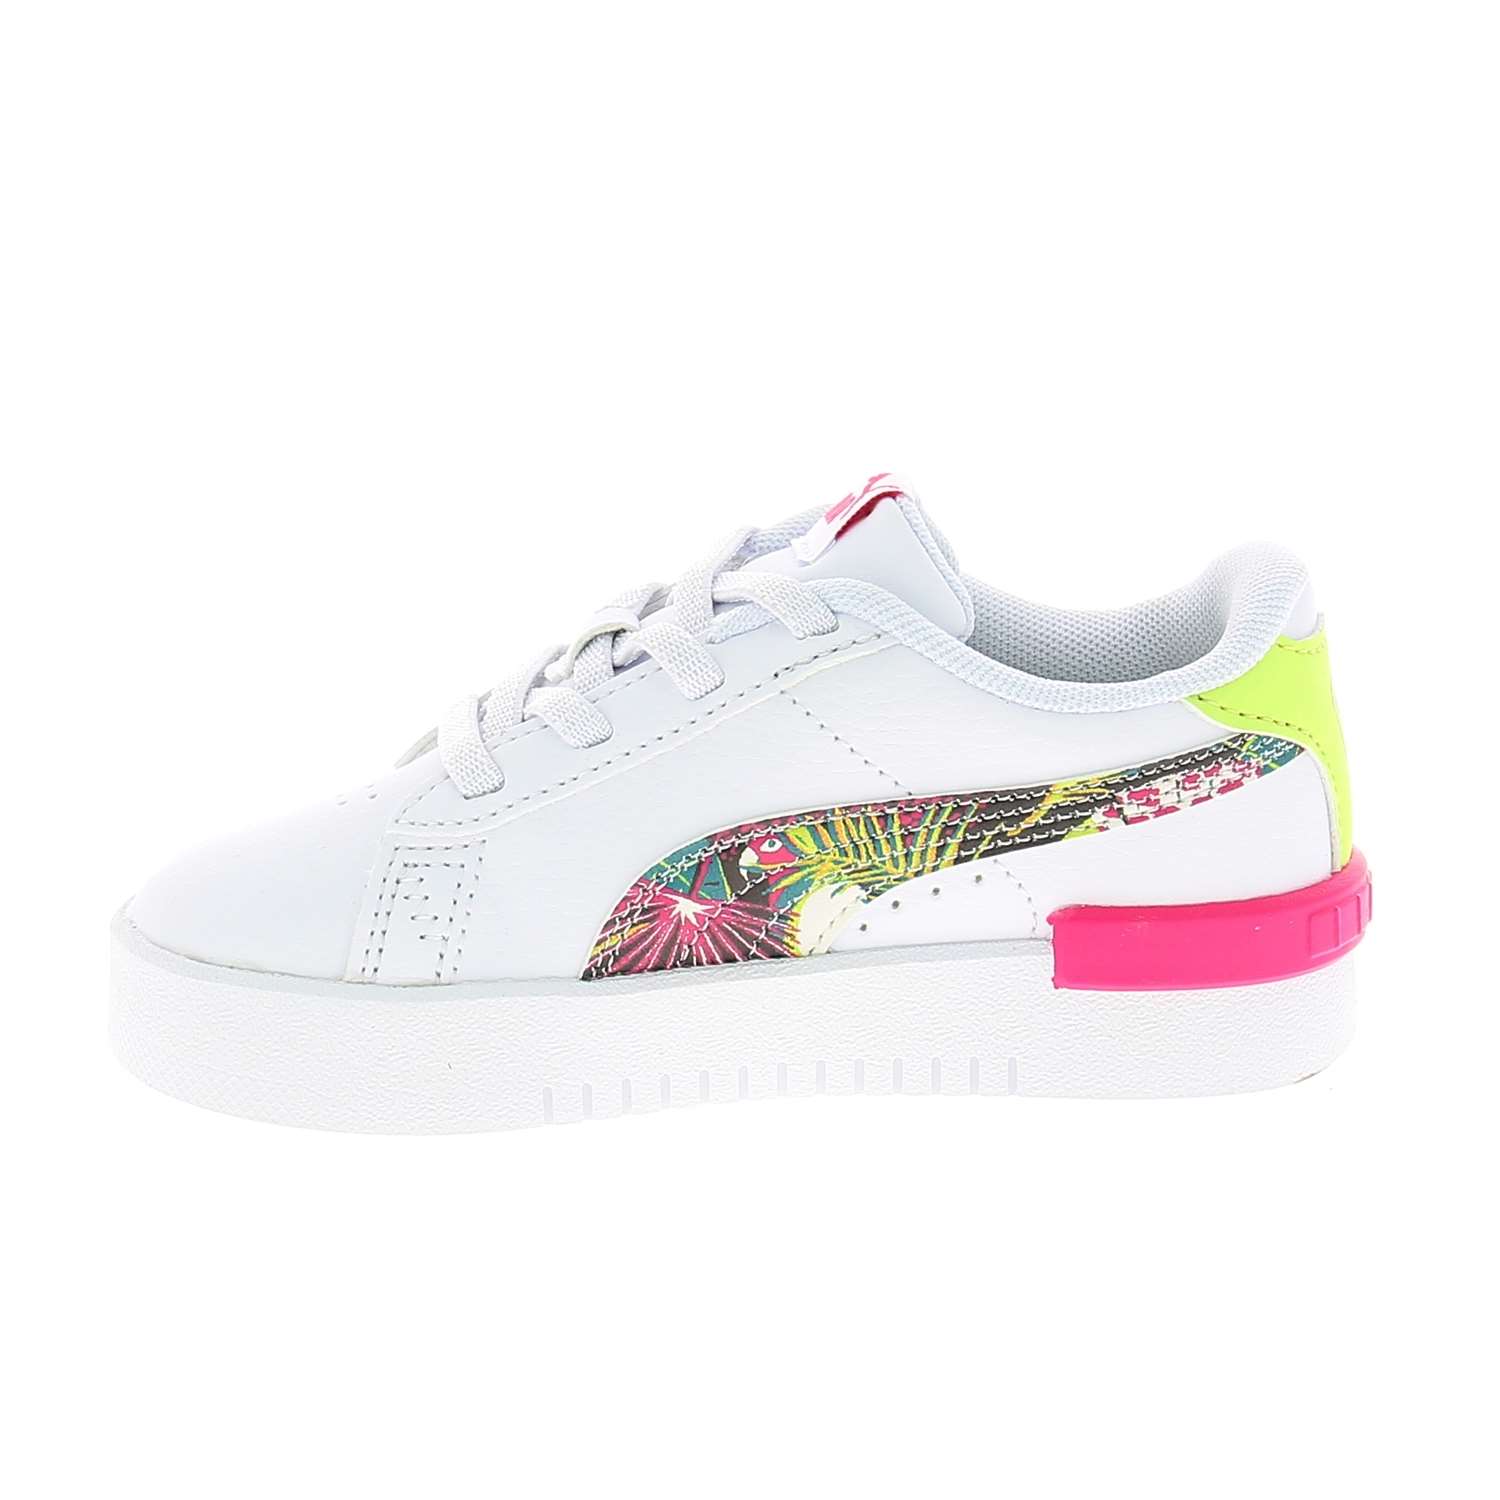 05 - JADA VACAY QUEEN AC INF - PUMA - Chaussures à lacets - Synthétique